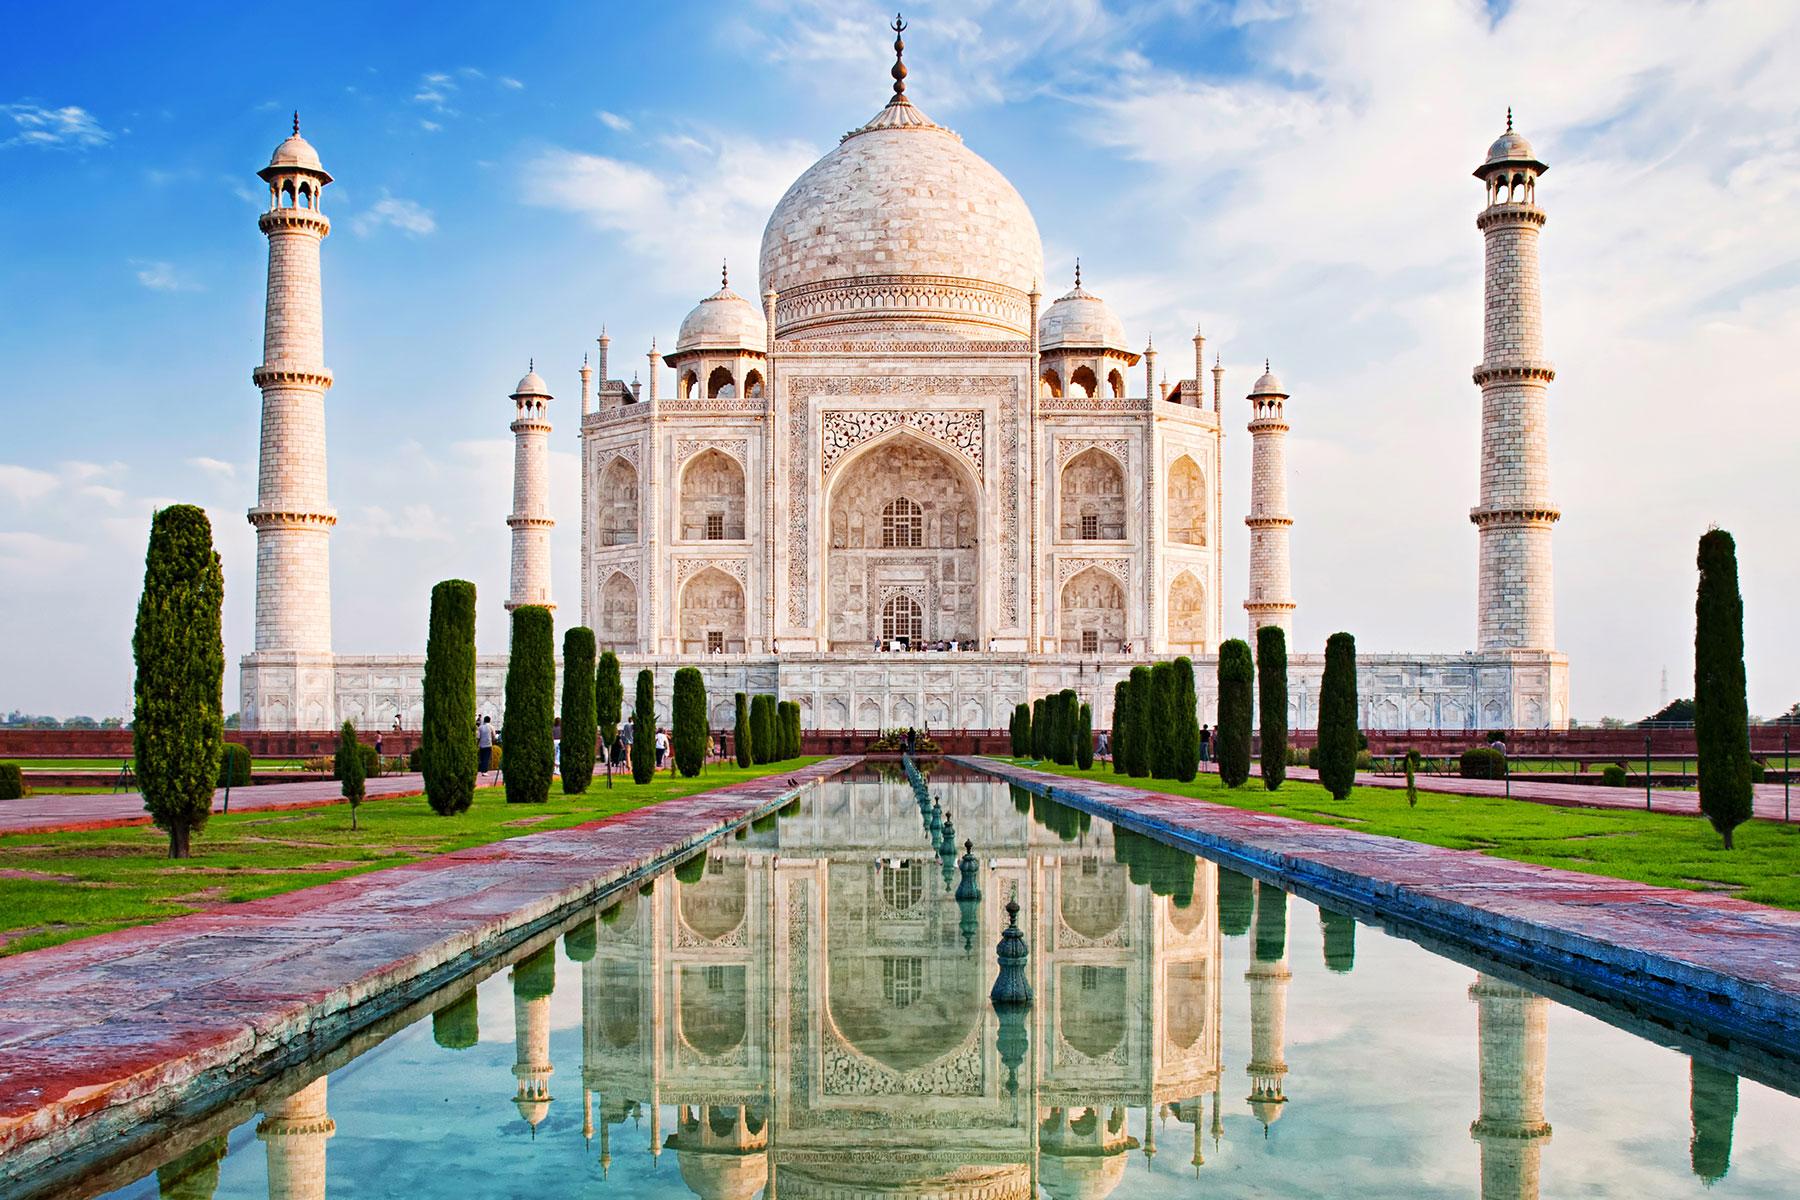 Image result for Are you going to visit Taj Mahal? Well, you should rush soon... Here's Why!